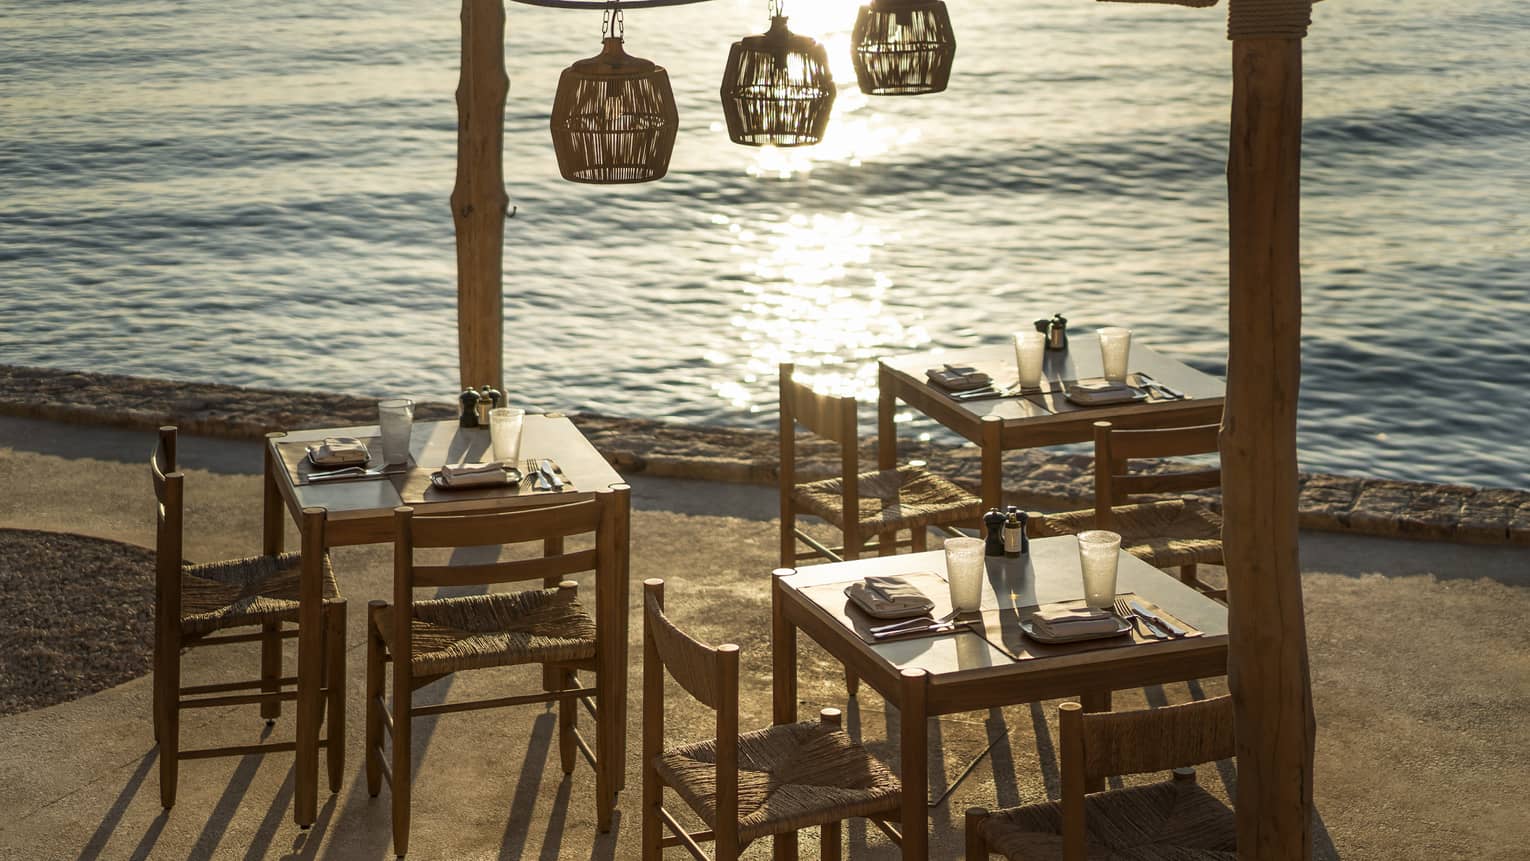 Outdoor taverna next to ocean with three wooden tables and chairs, three wooden lamps